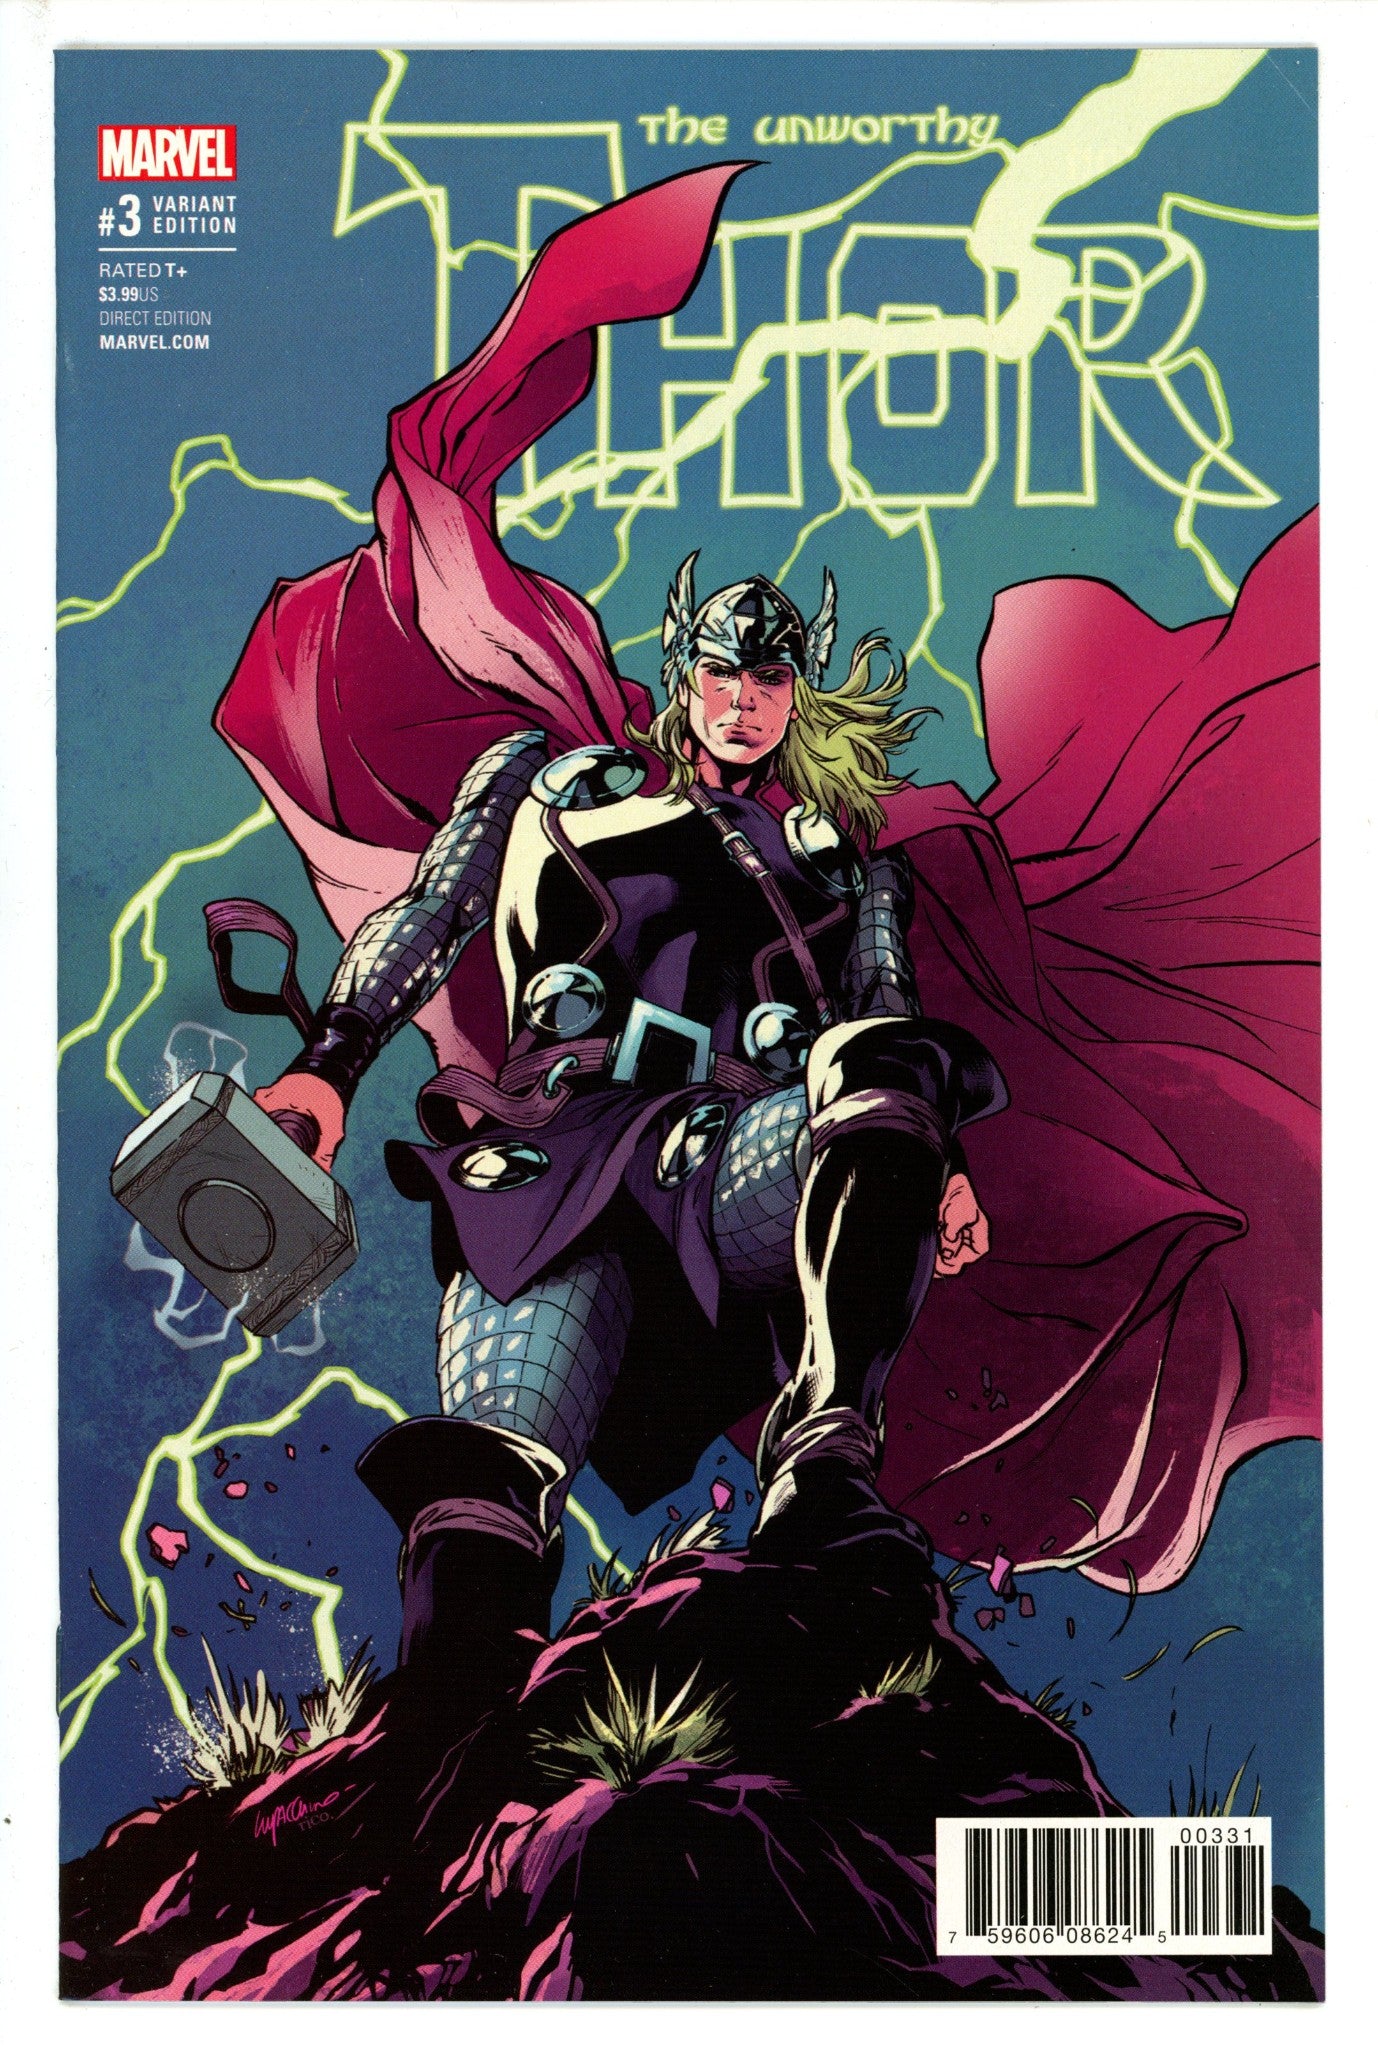 The Unworthy Thor Vol 1 3 Lupacchino Incentive Variant (2017)